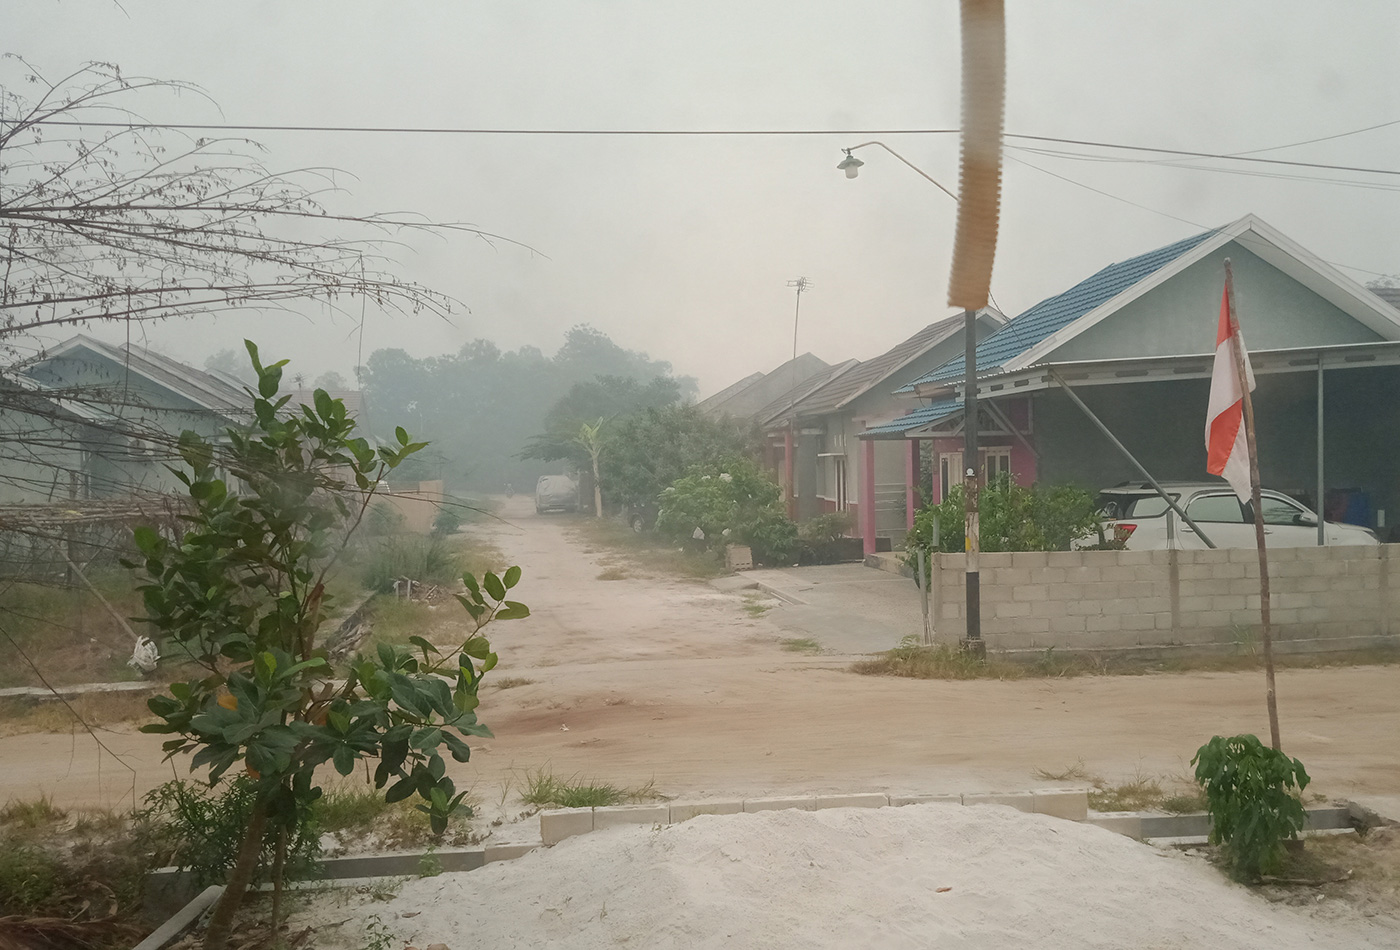 The view from the front yard of Witni's house during the forest and peatland fires in September 2019.